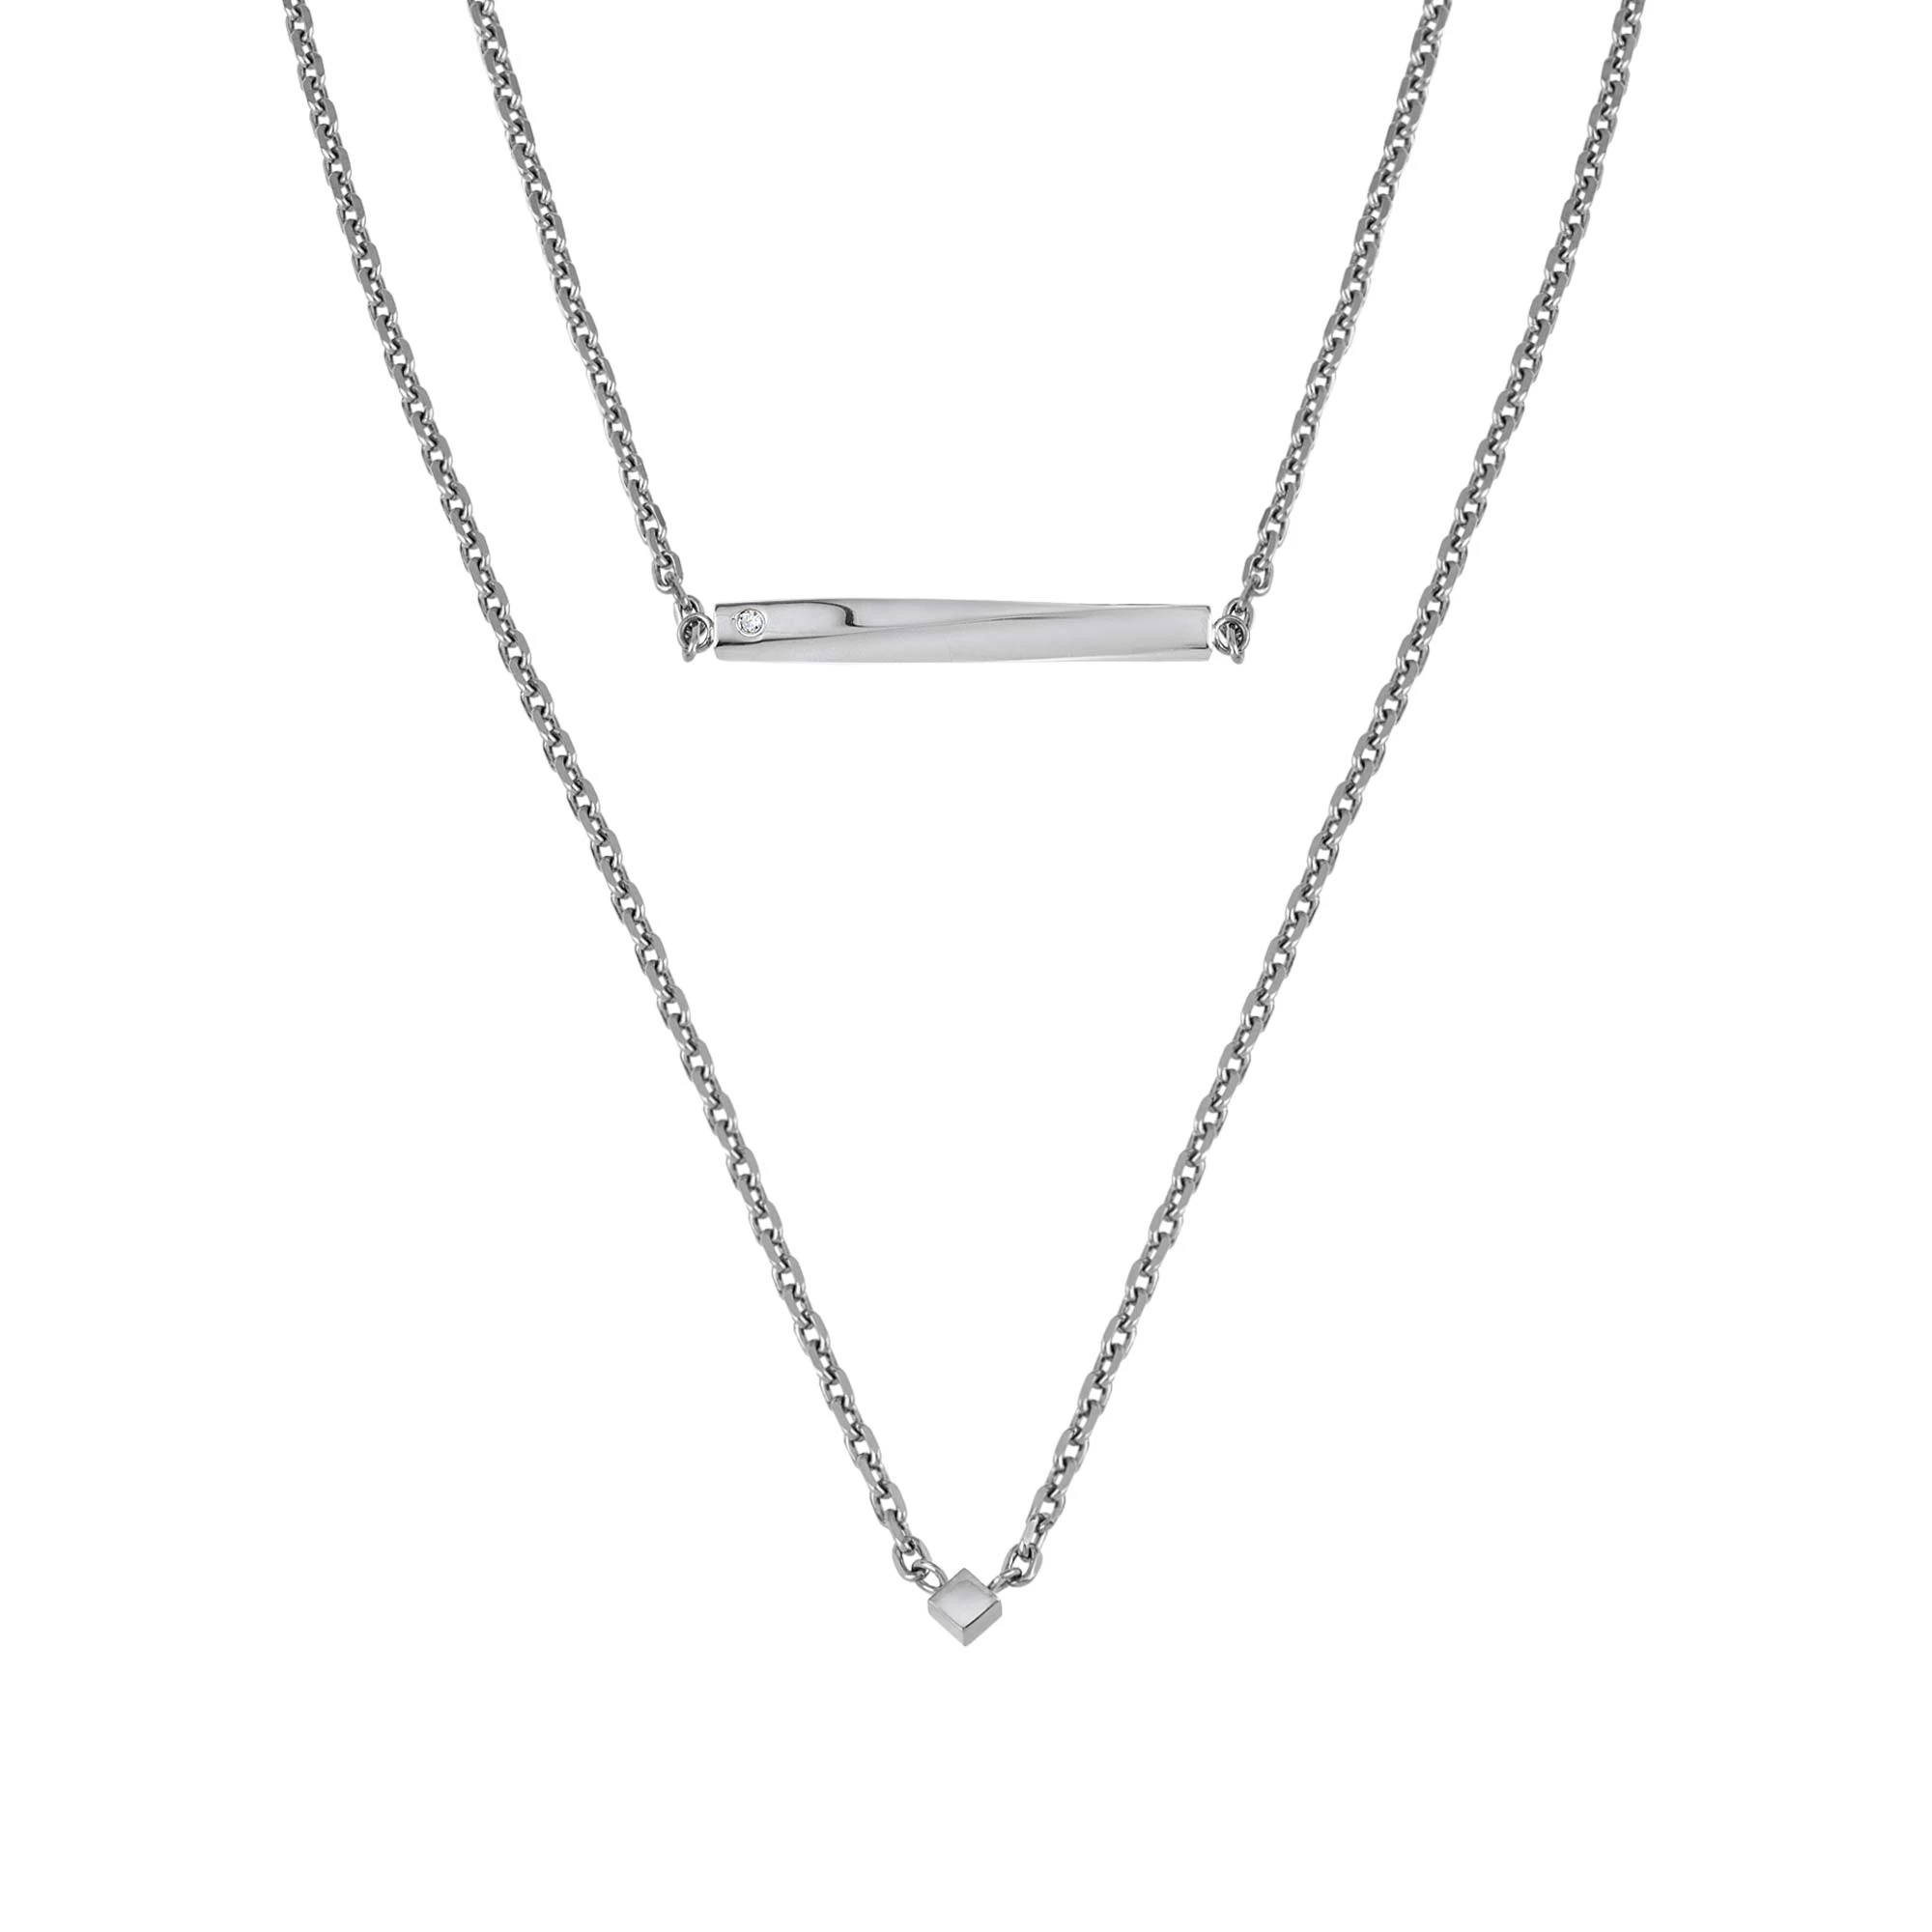 B ESSENTIAL - STEEL NECKLACE WITH NATURAL DIAMOND - 1 - TJ3009 | Breil